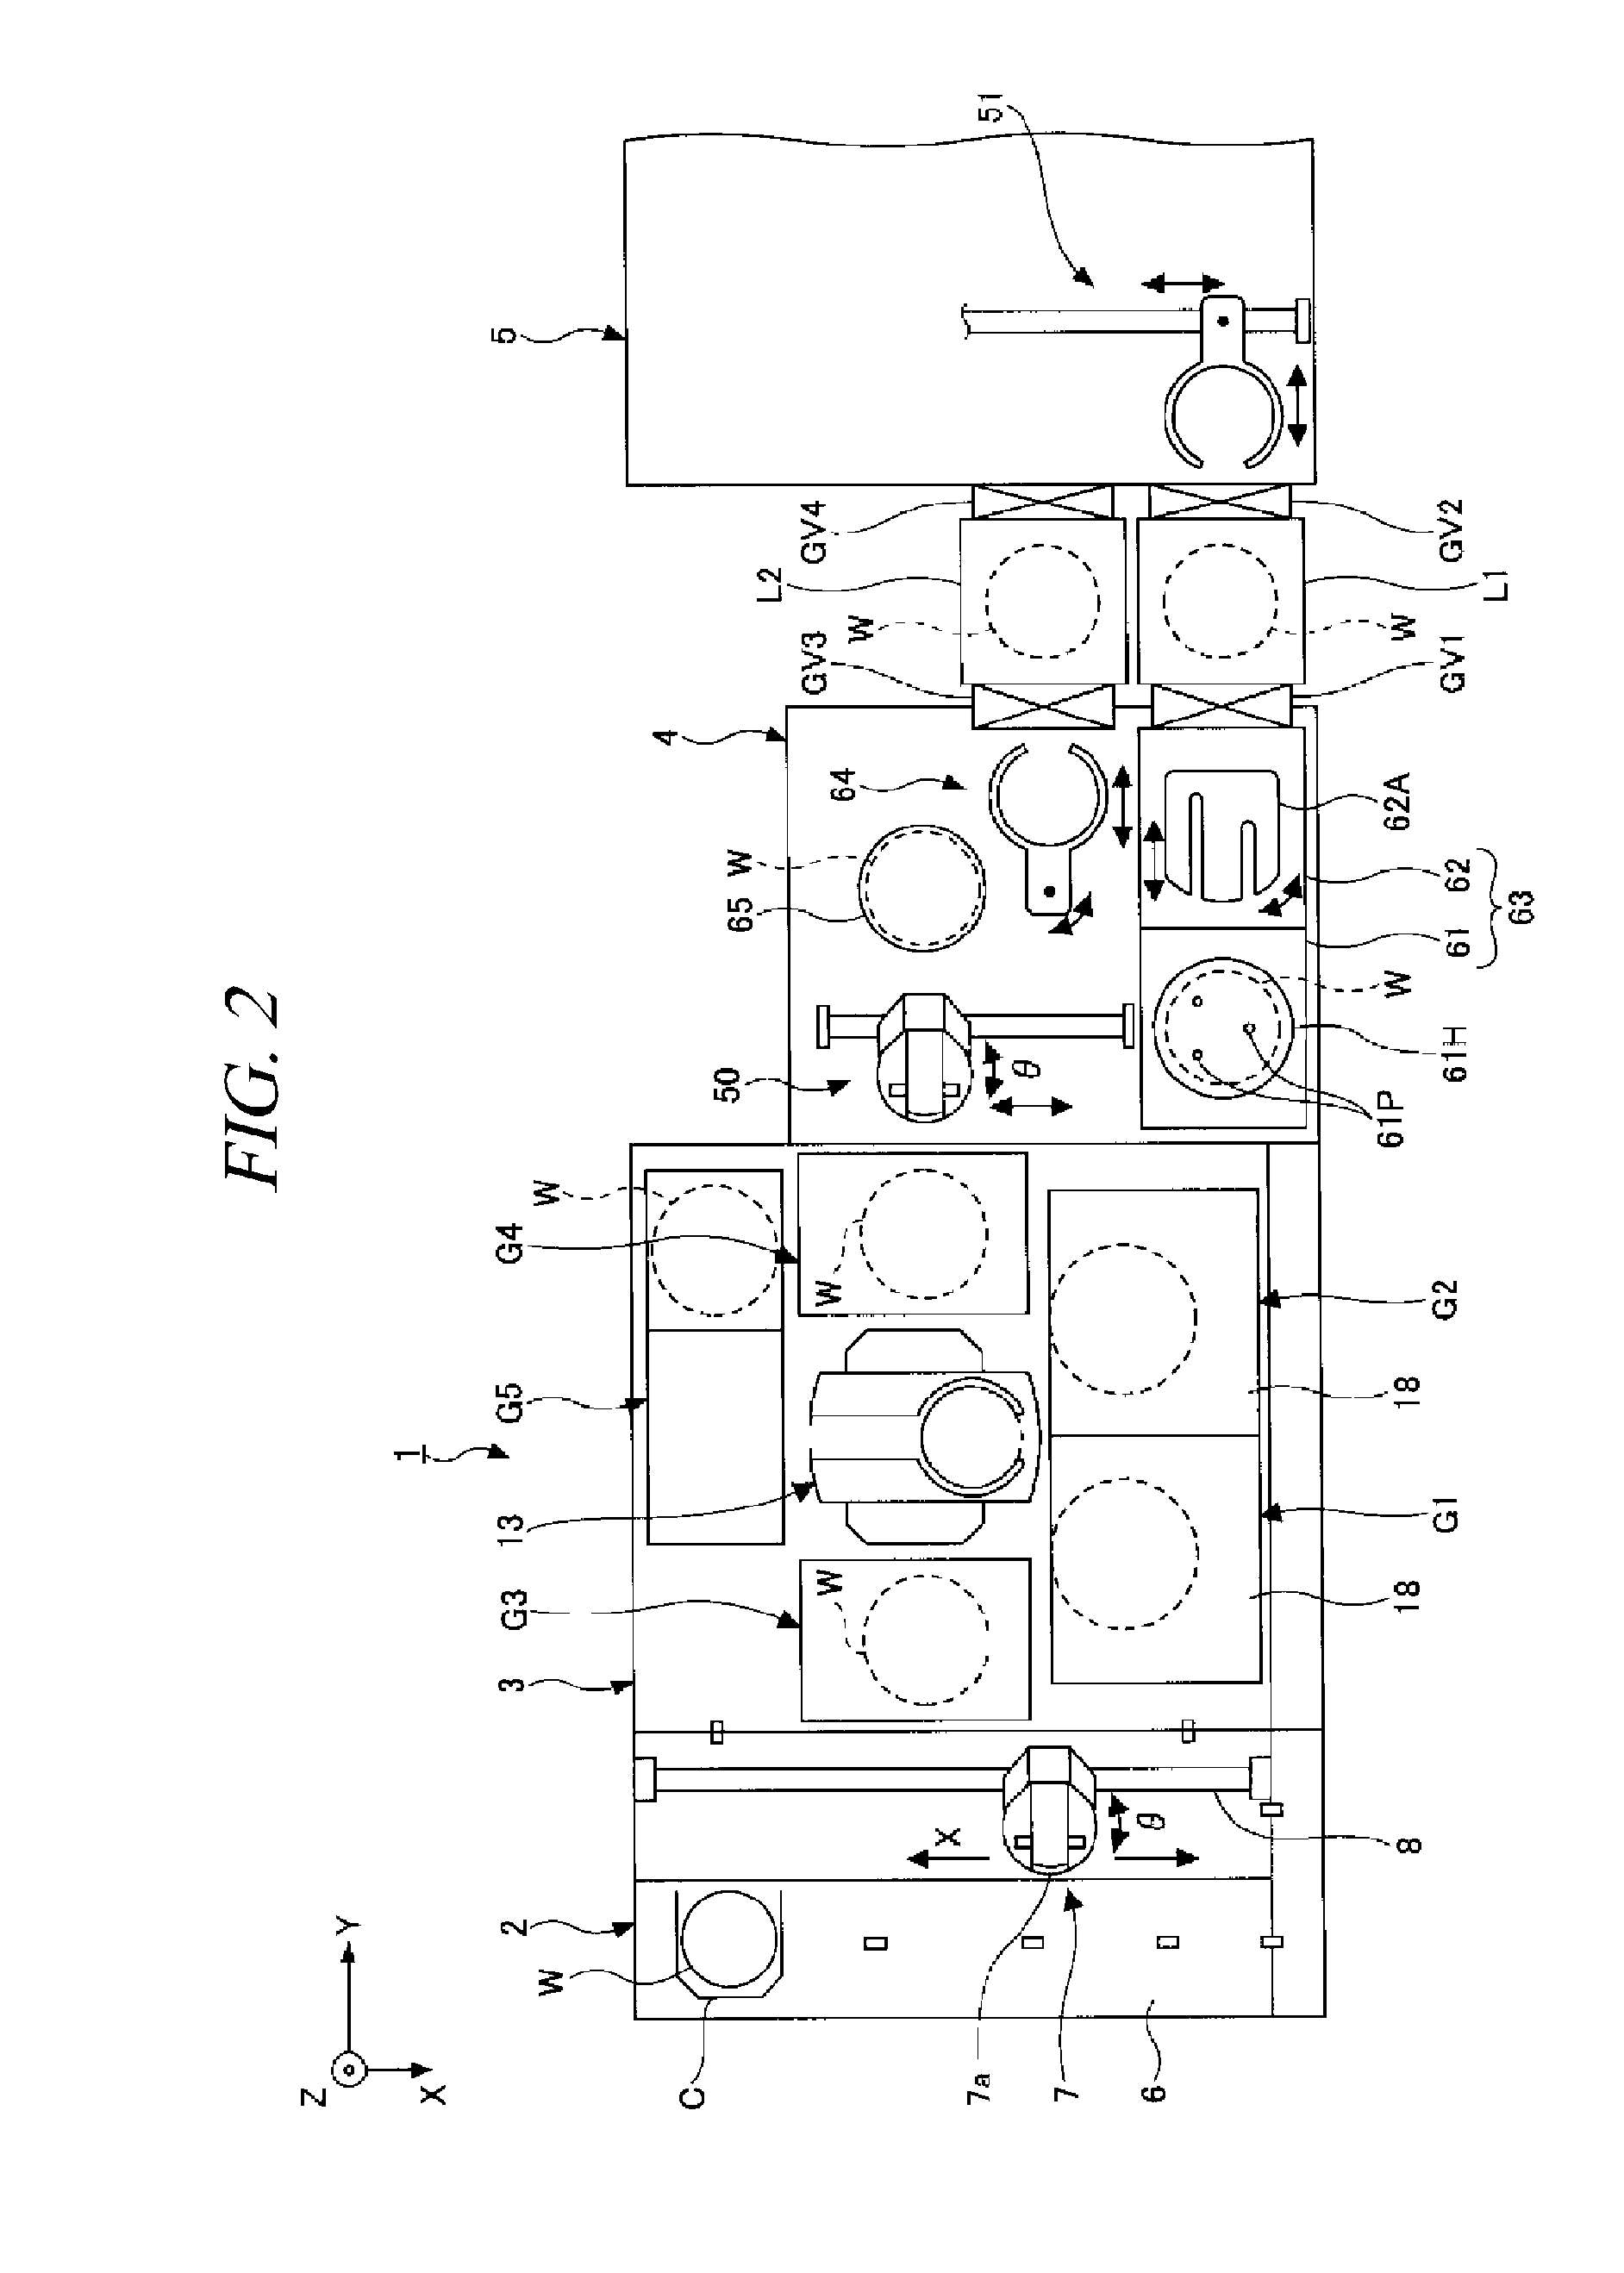 Photoresist coating and developing apparatus, substrate transfer method and interface apparatus